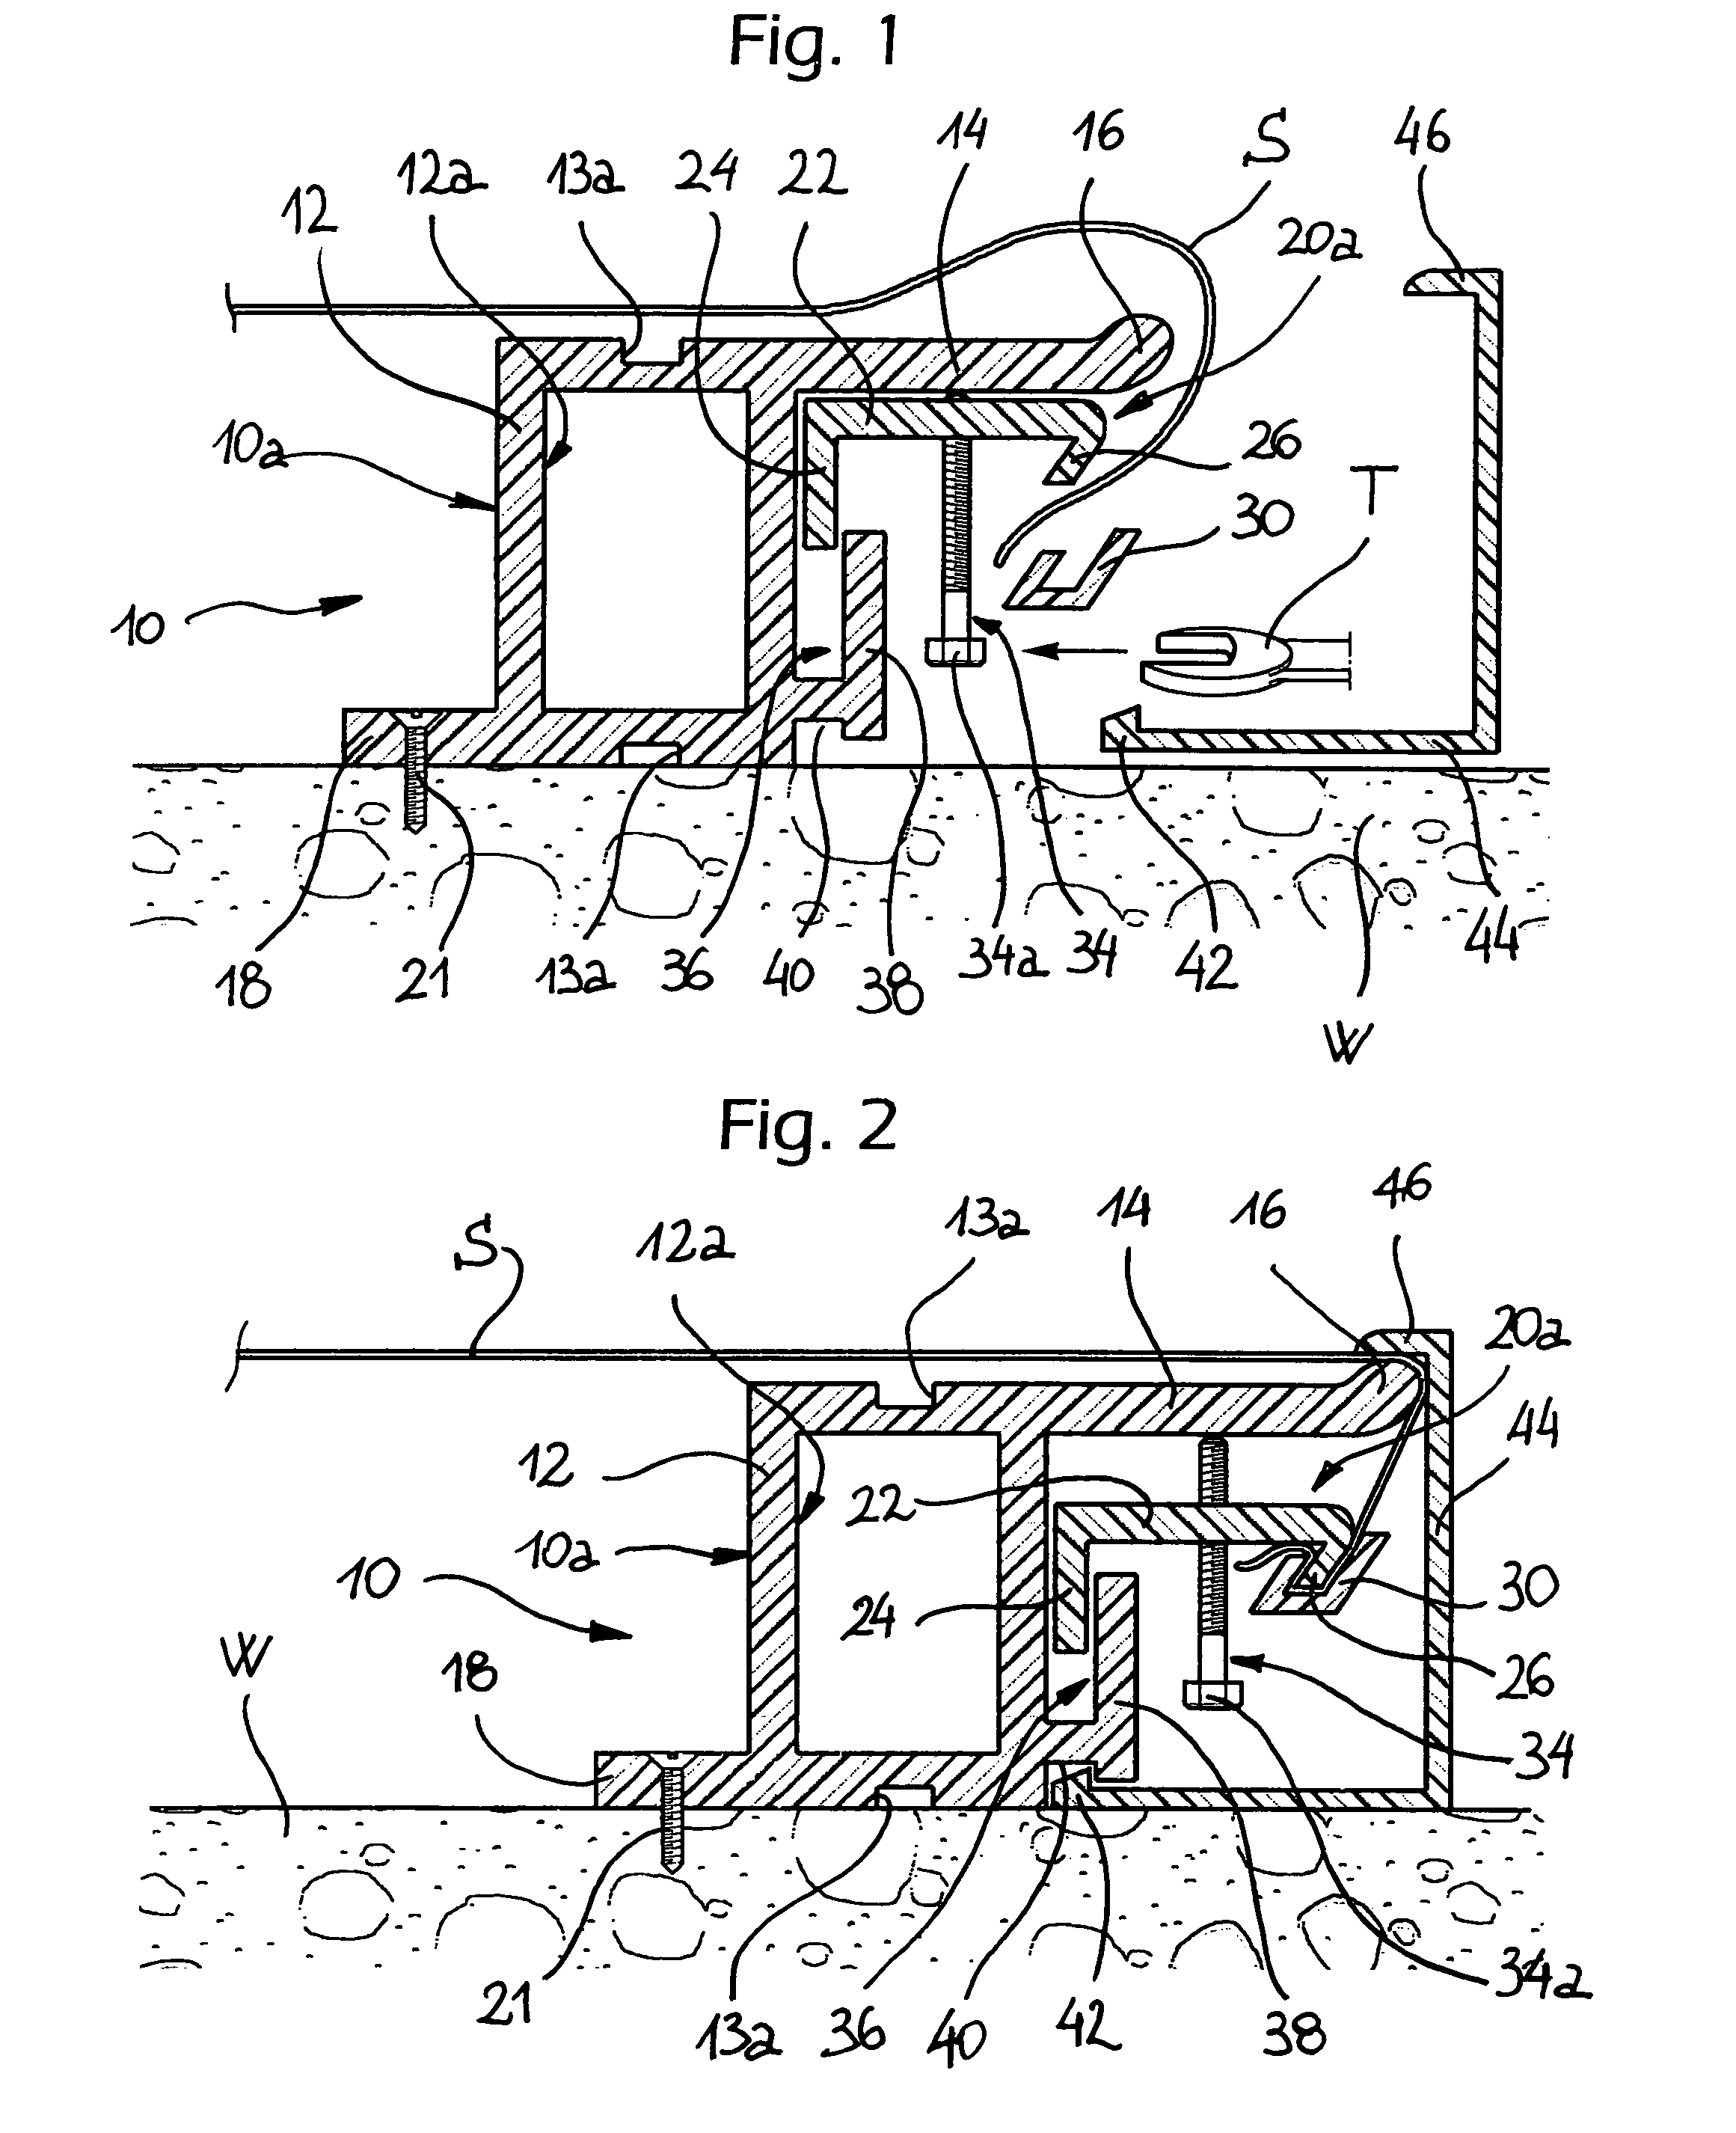 Elongated element for the frame of a panel system comprising a flexible sheet material